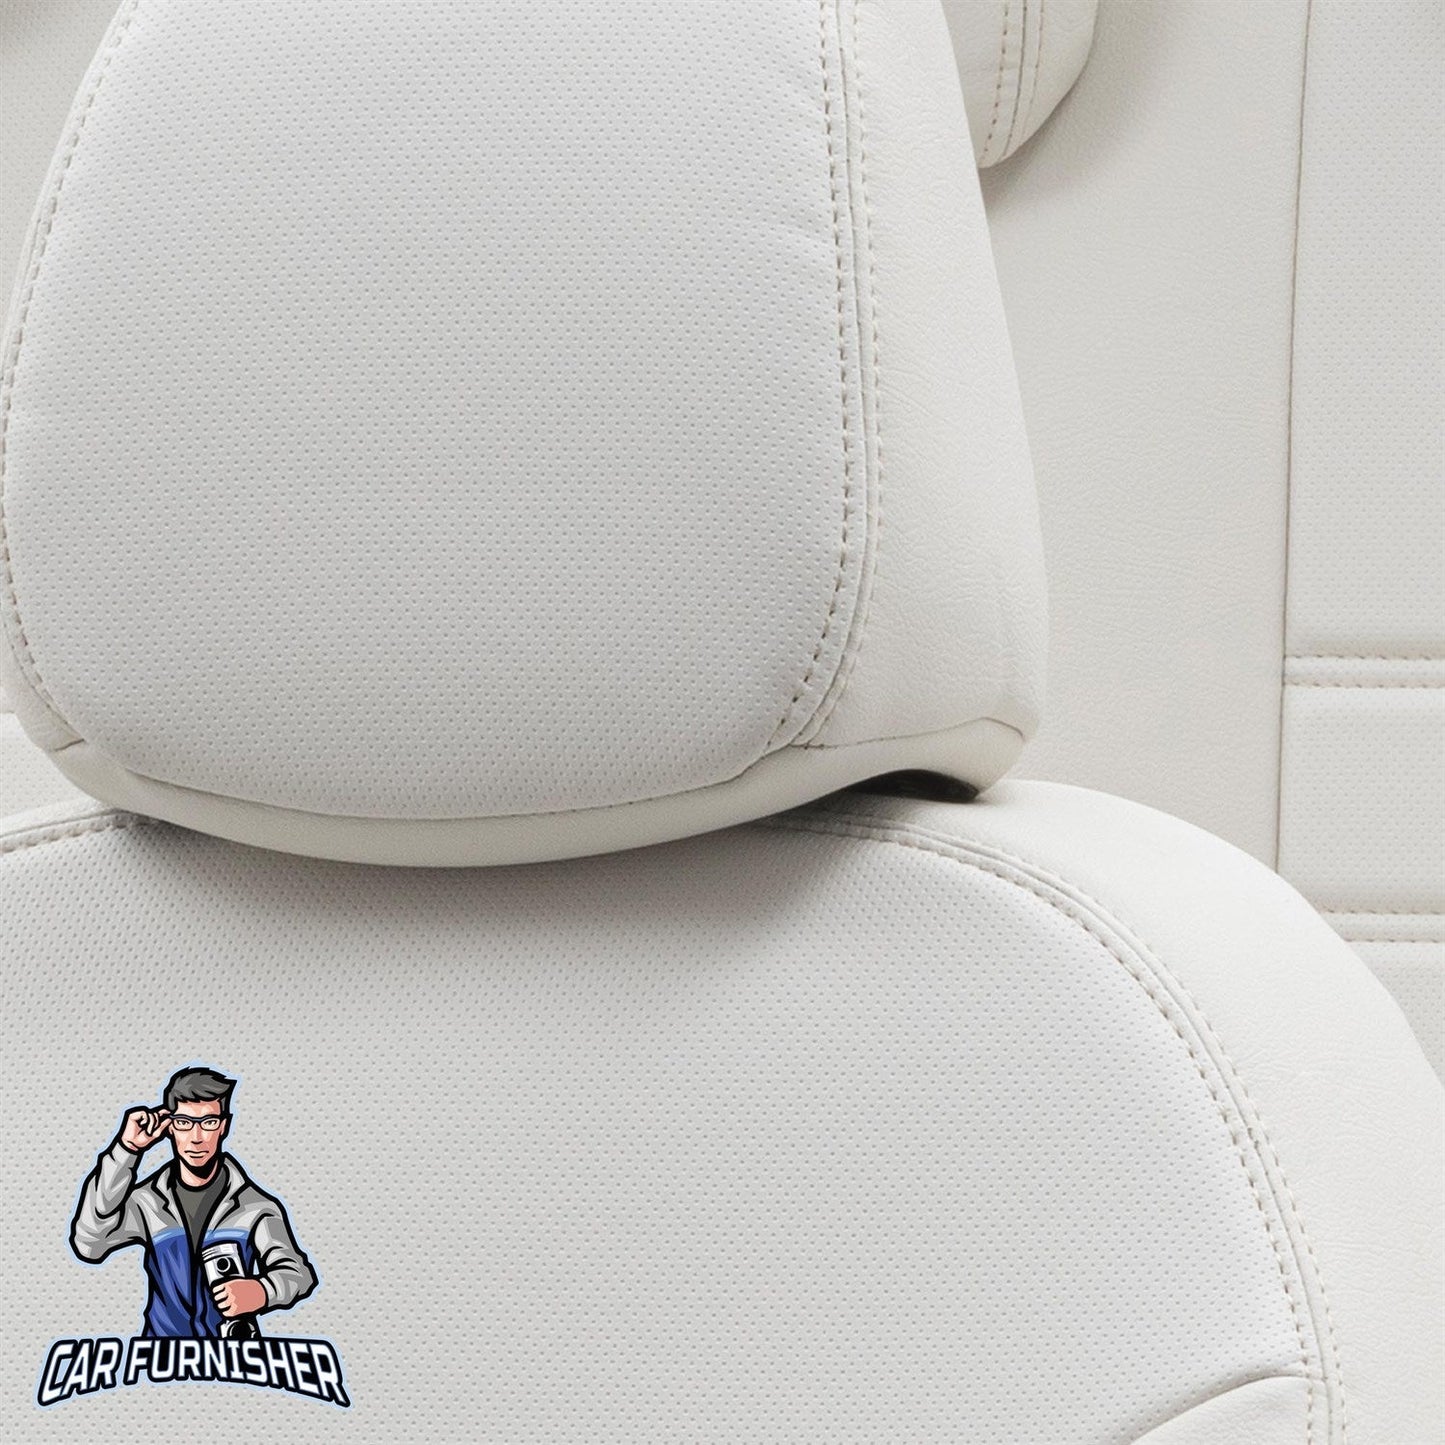 Ford Kuga Seat Covers Istanbul Leather Design Ivory Leather